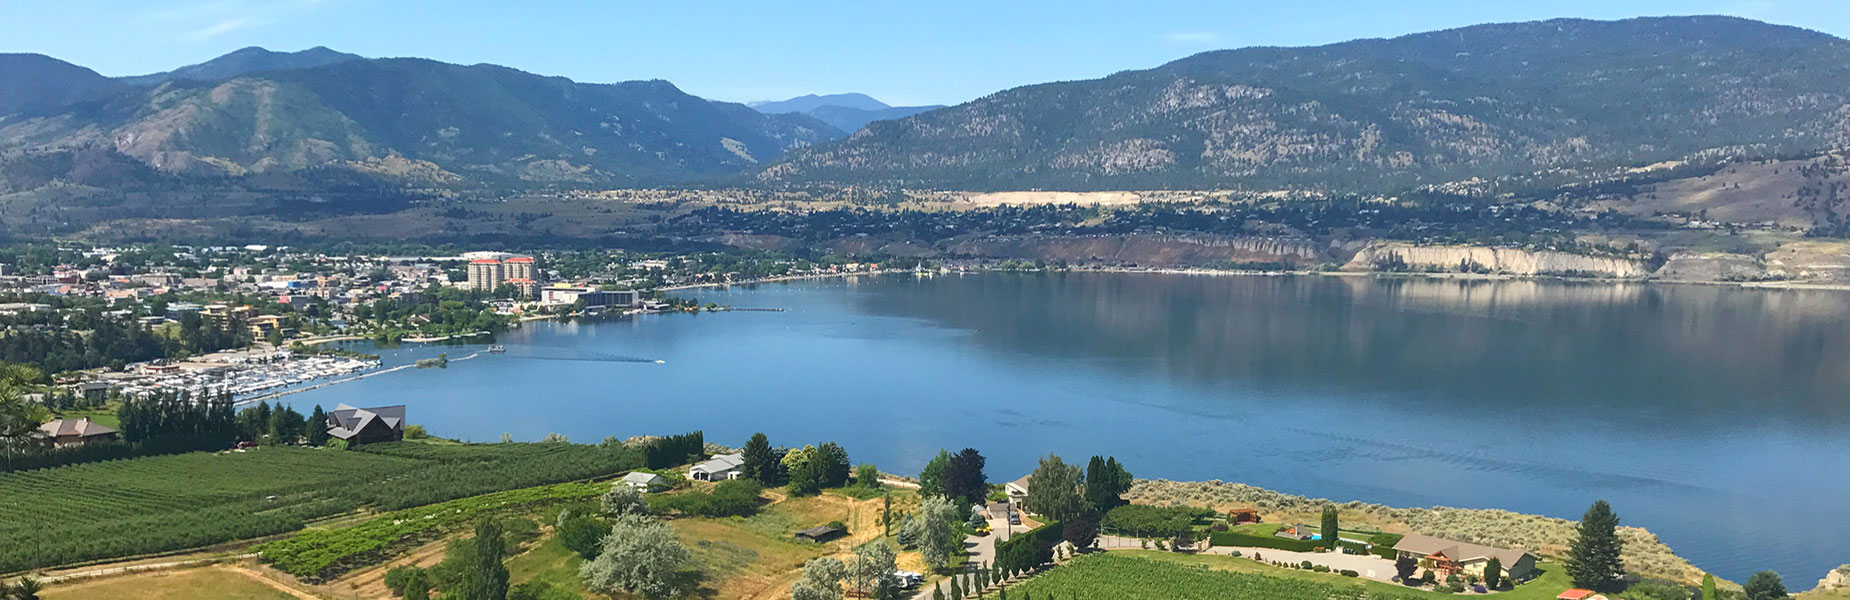 EasyGo Holidays lets you enjoy the great outdoors in the Okanagan Valley while still being able to tour around and enjoy all the areas have to offer.